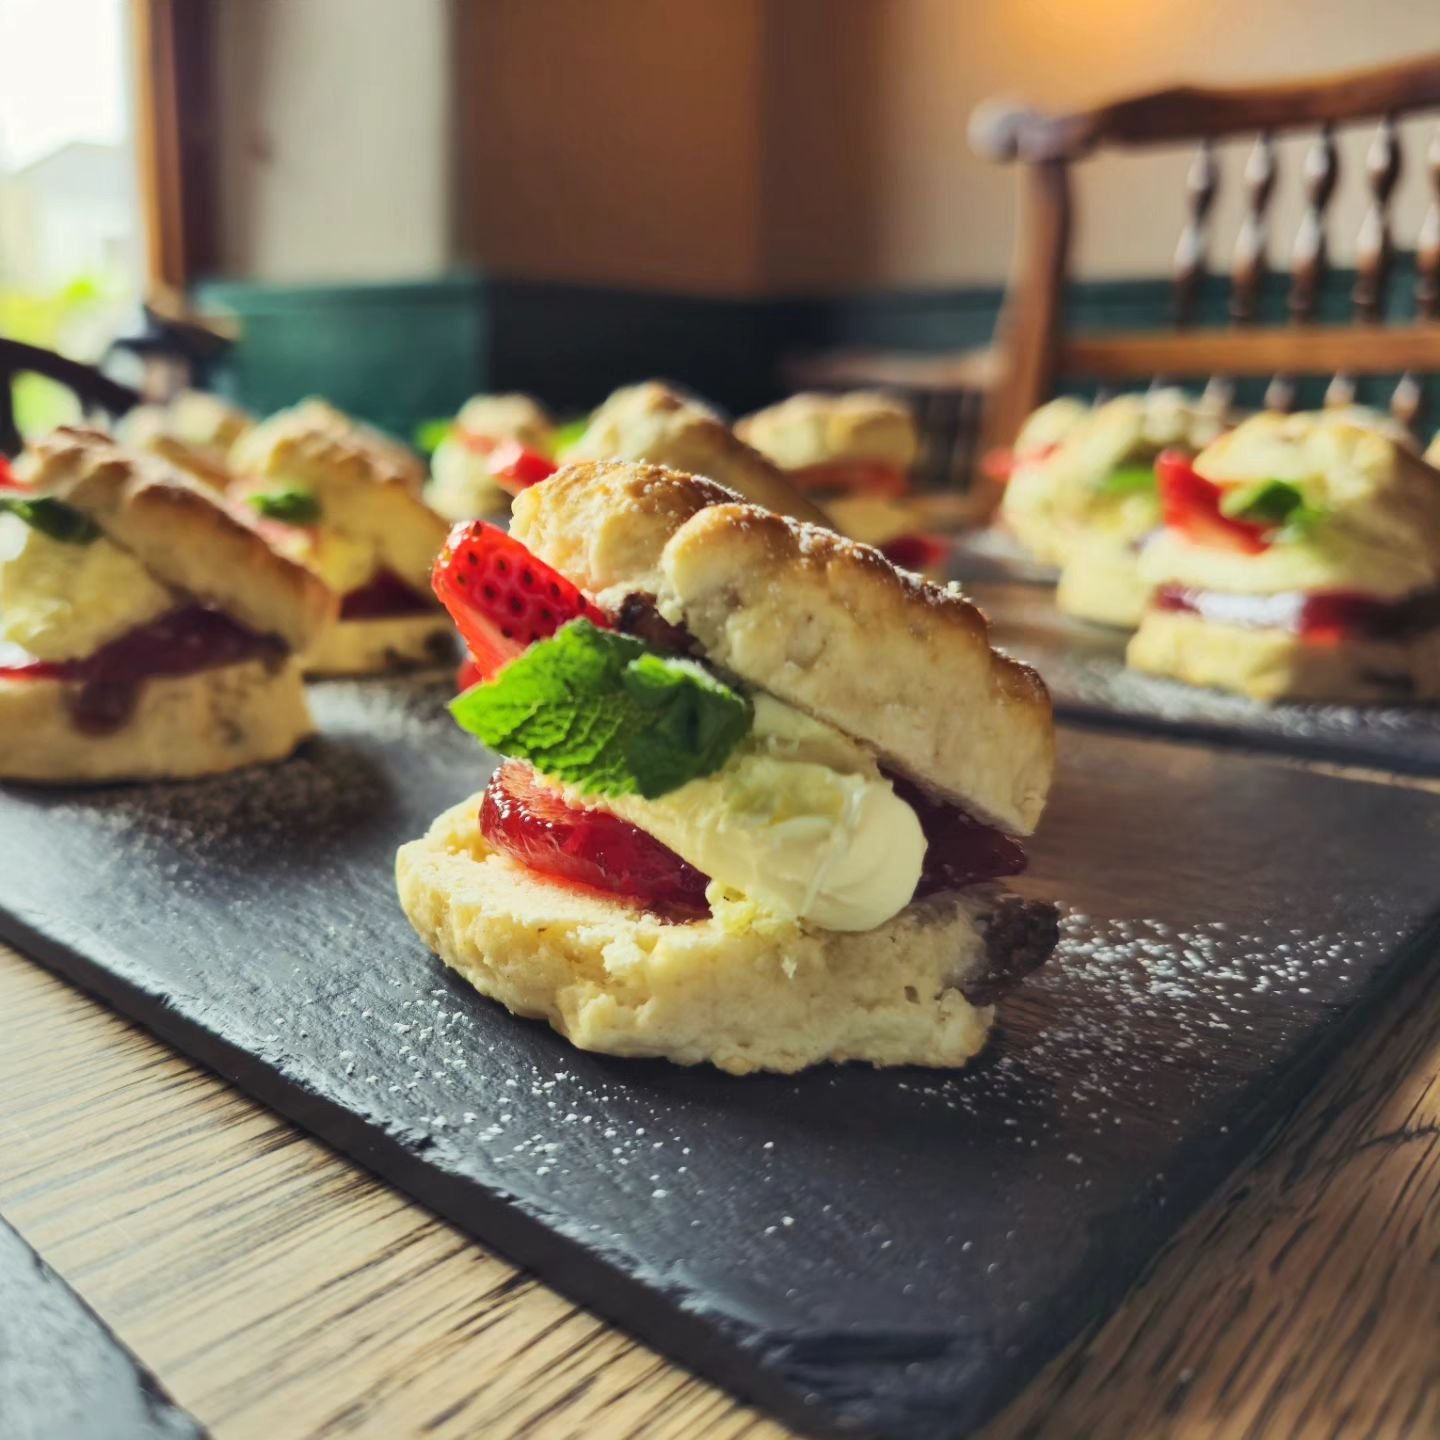 Holding an event but don't want to cook? Leave it to us for all your catering needs! Take a look at our cream tea buffet we offered recently.

Contact events@thepheasantcornwall.com for all your event needs!

#Newquay #PrivateEvent #PrivateParty #Eve